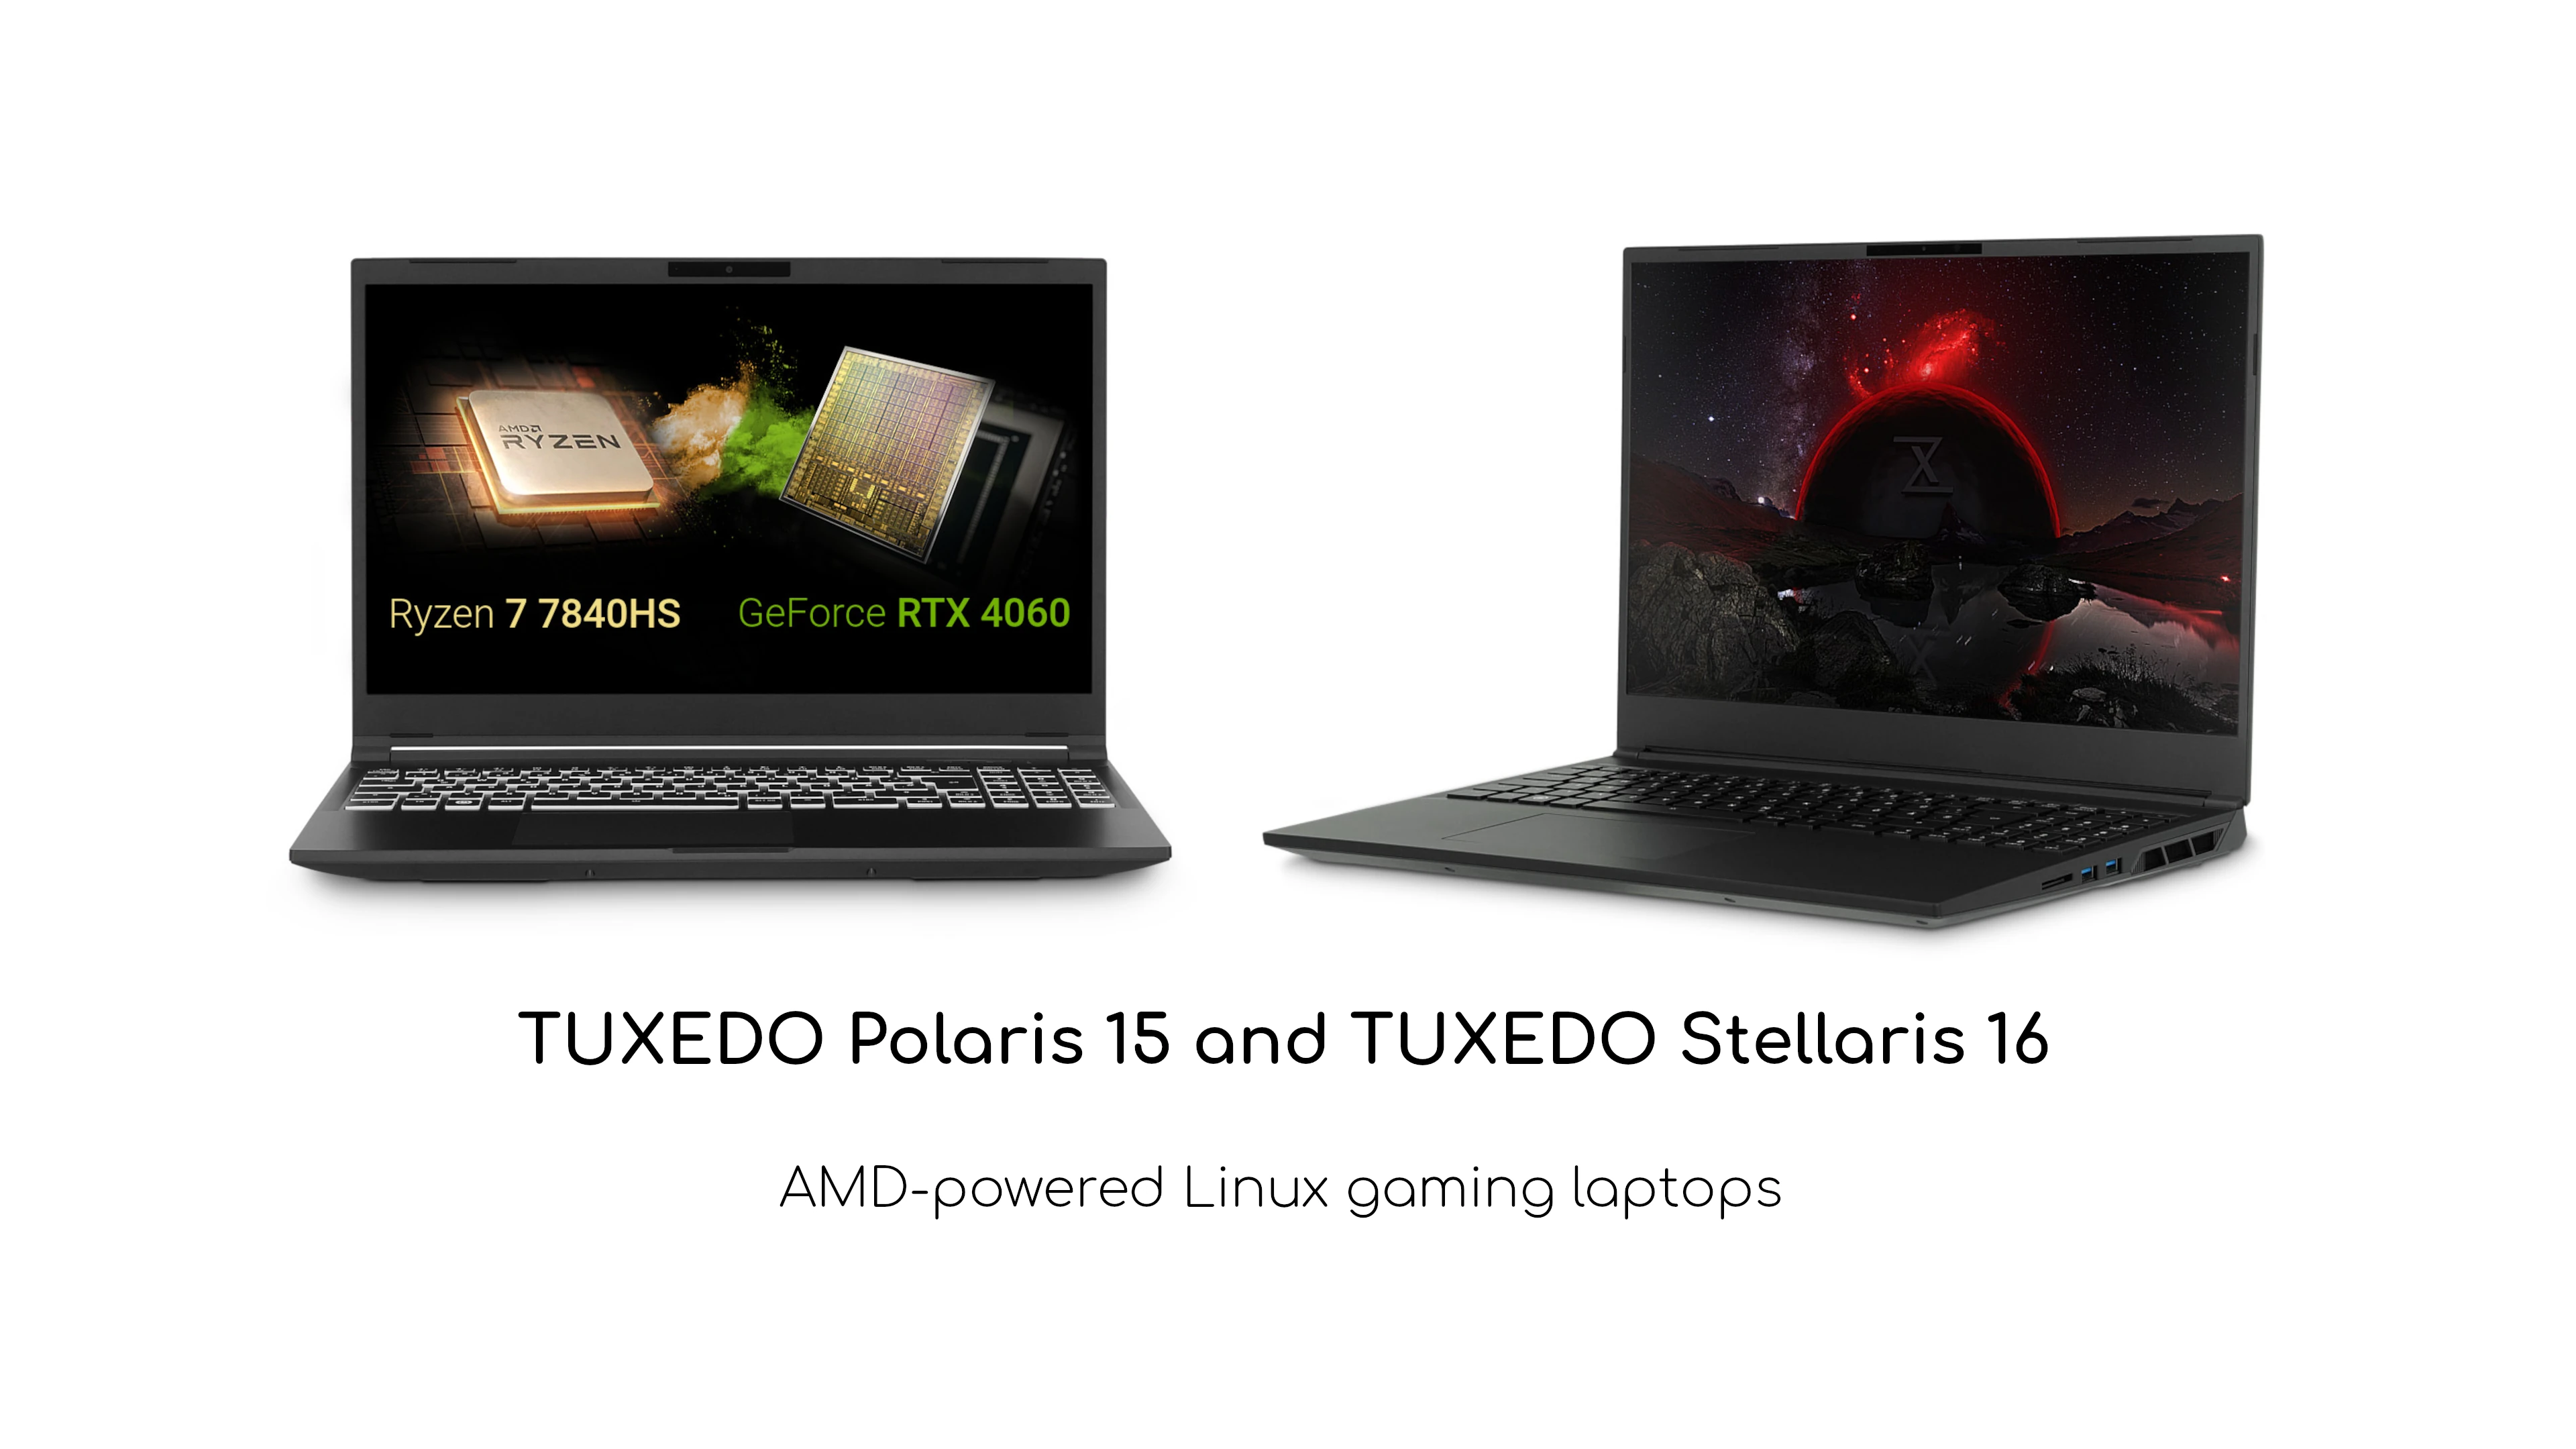 TUXEDO Linux Gaming Laptops Powered by AMD Ryzen 7000 Series CPUs Are Back